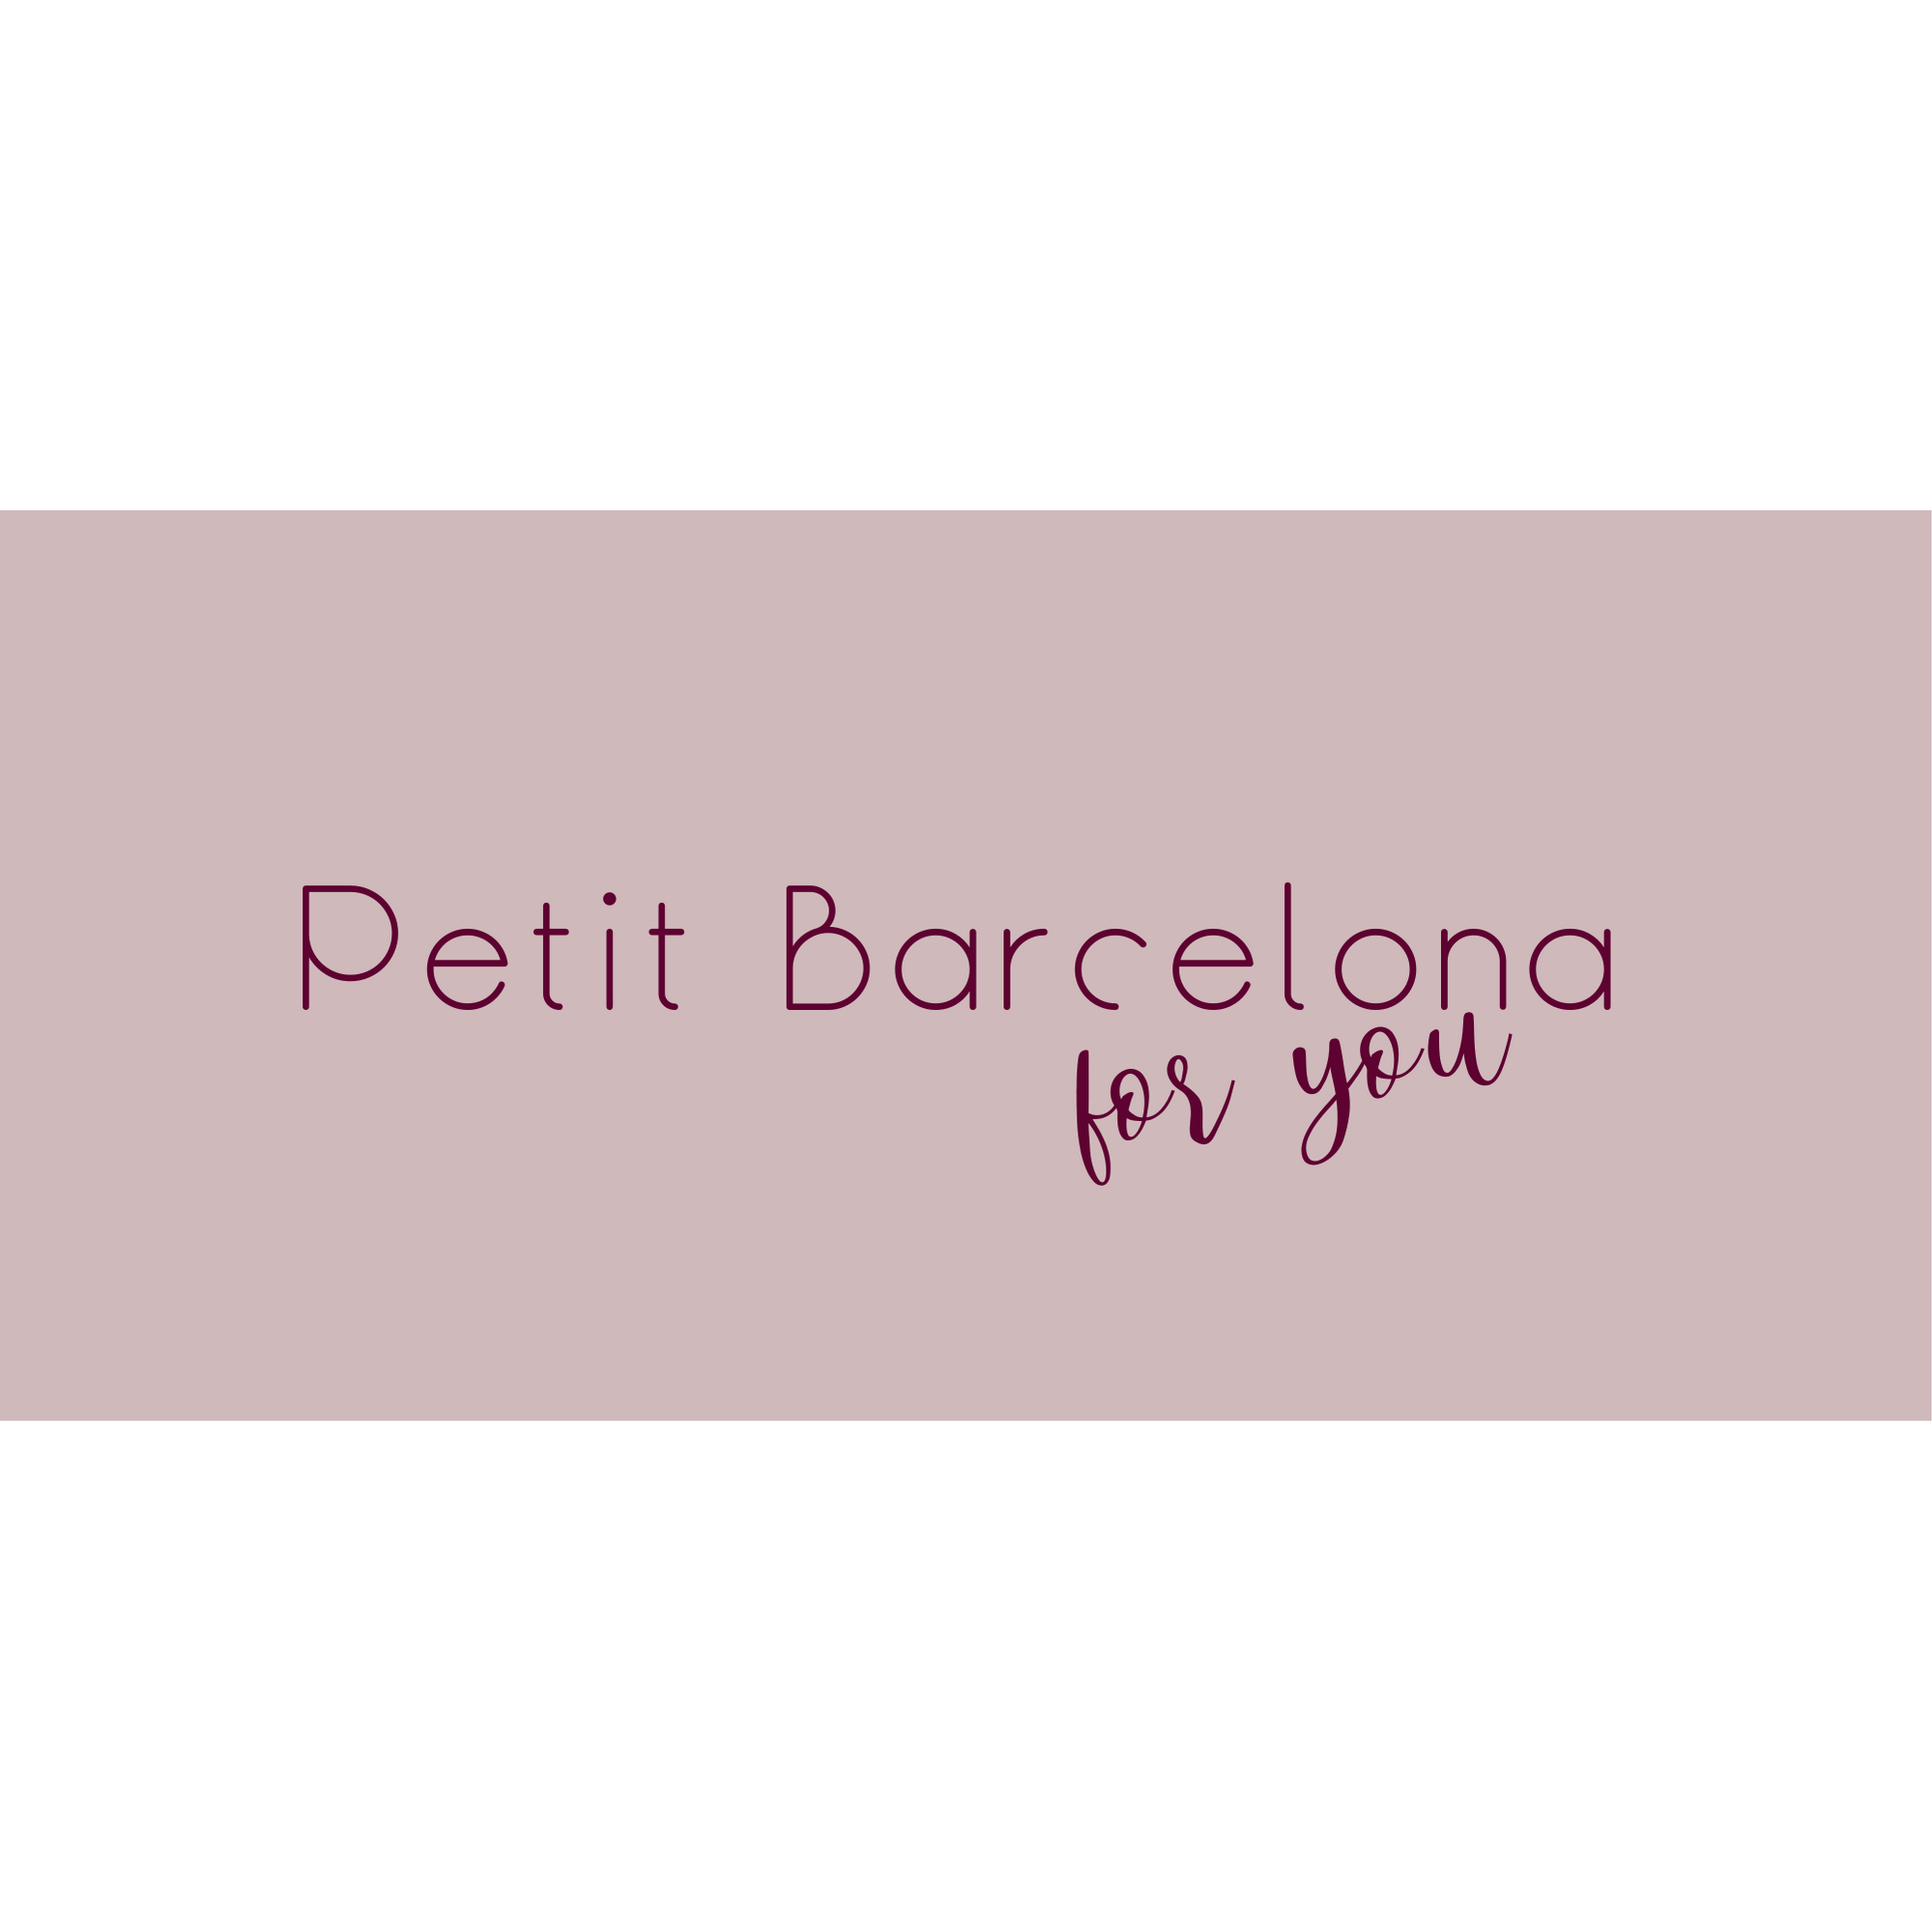 eGIFT CARD - The Gift of Shoes - PetitBarcelona